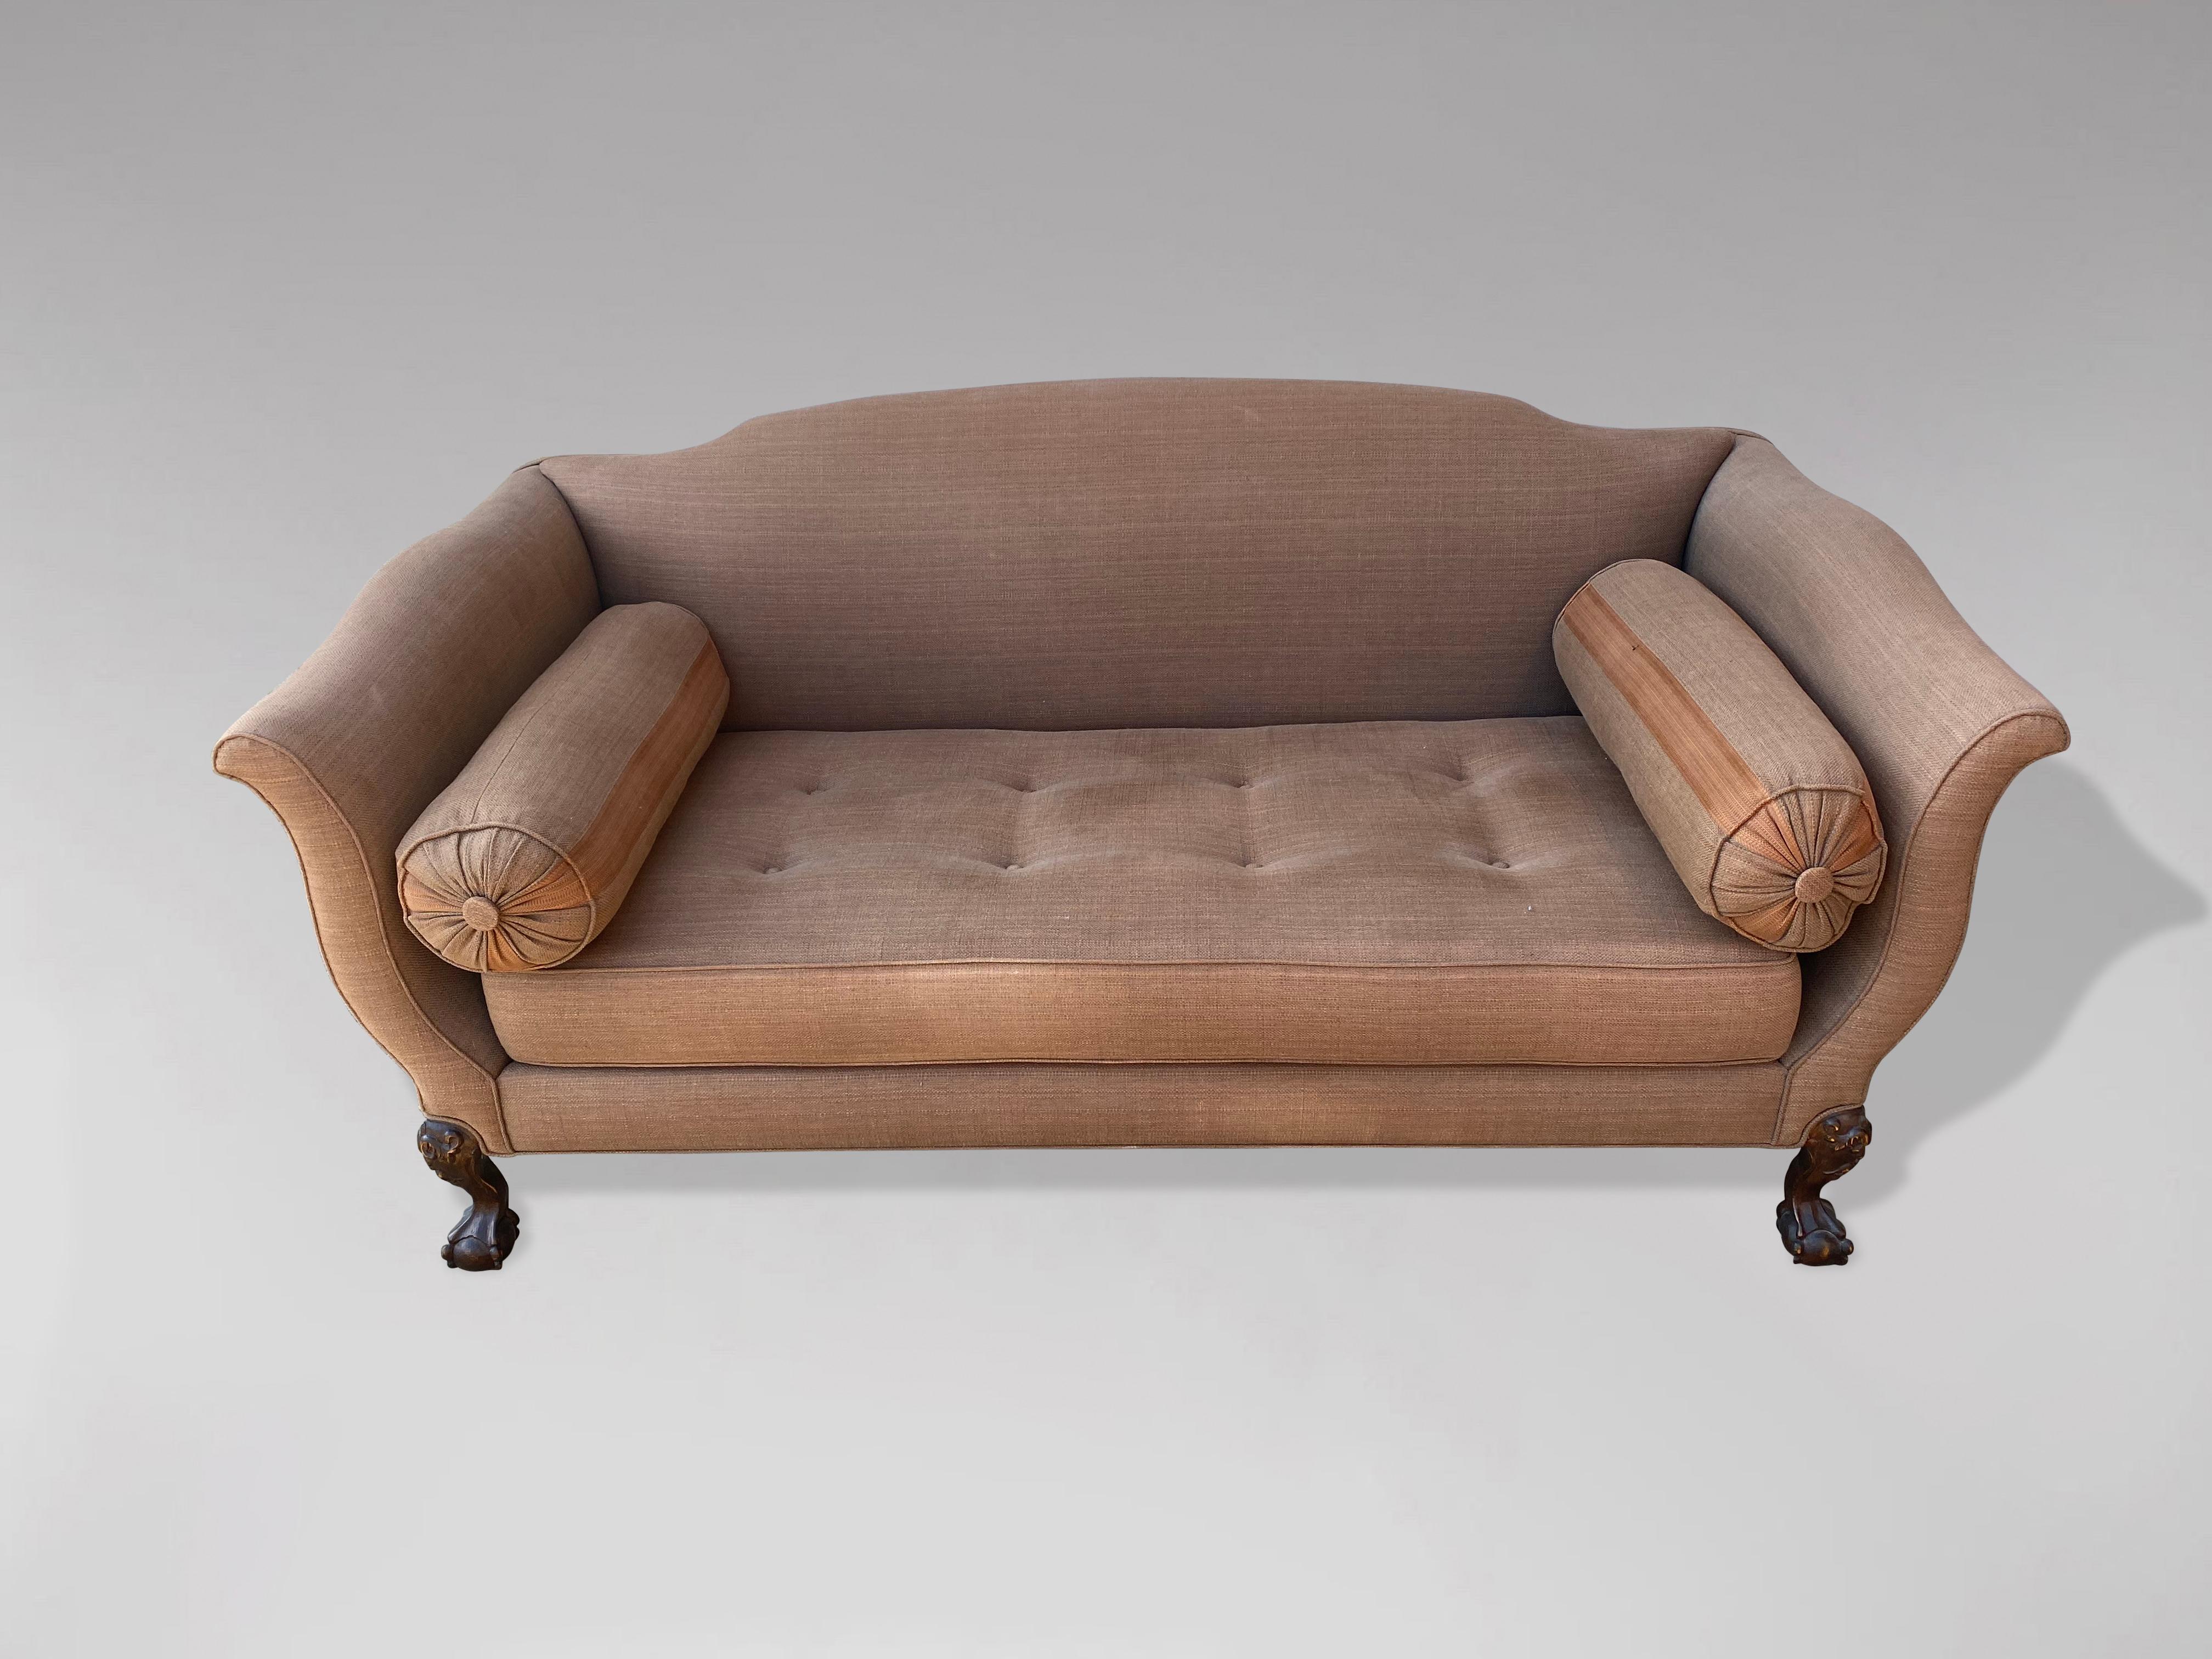 20th Century Edwardian Period Reupholstered Camel Back Sofa 2